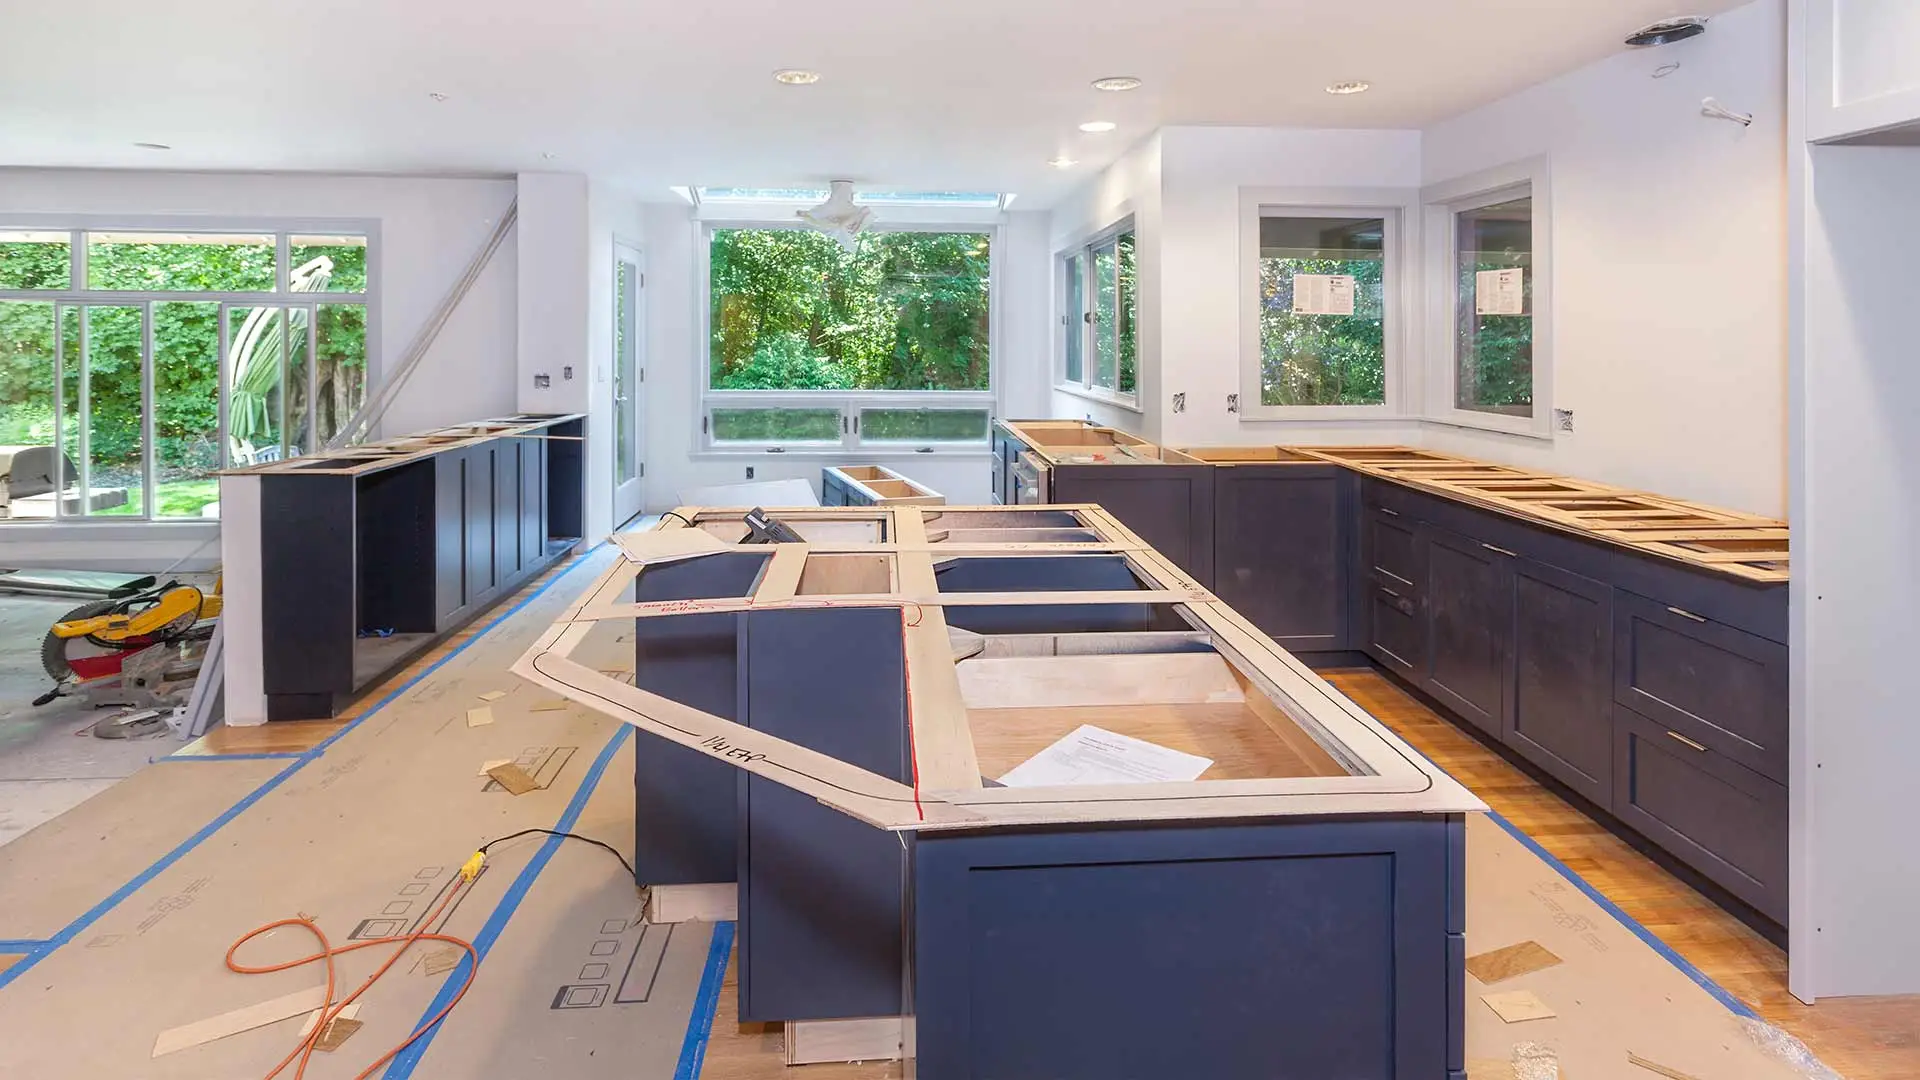 We offer top rated remodeling of kitchens, bathrooms, and other spaces in the home for residents in Central Florida, including Plant City, Lakeland, Winter Haven, and surrounding areas.